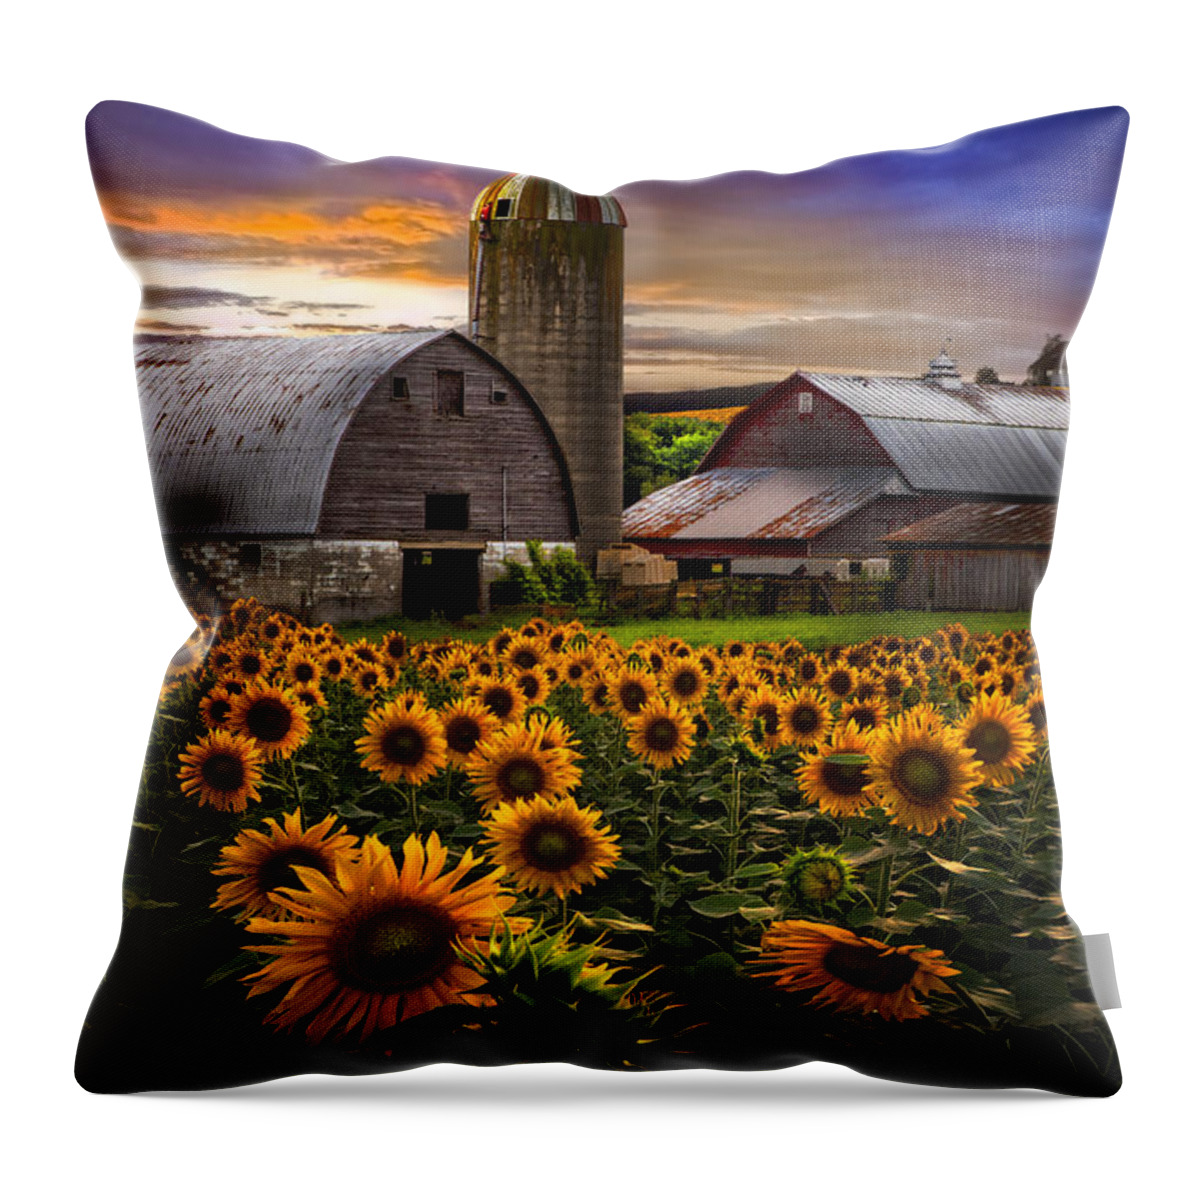 Barn Throw Pillow featuring the photograph Evening Sunflowers by Debra and Dave Vanderlaan